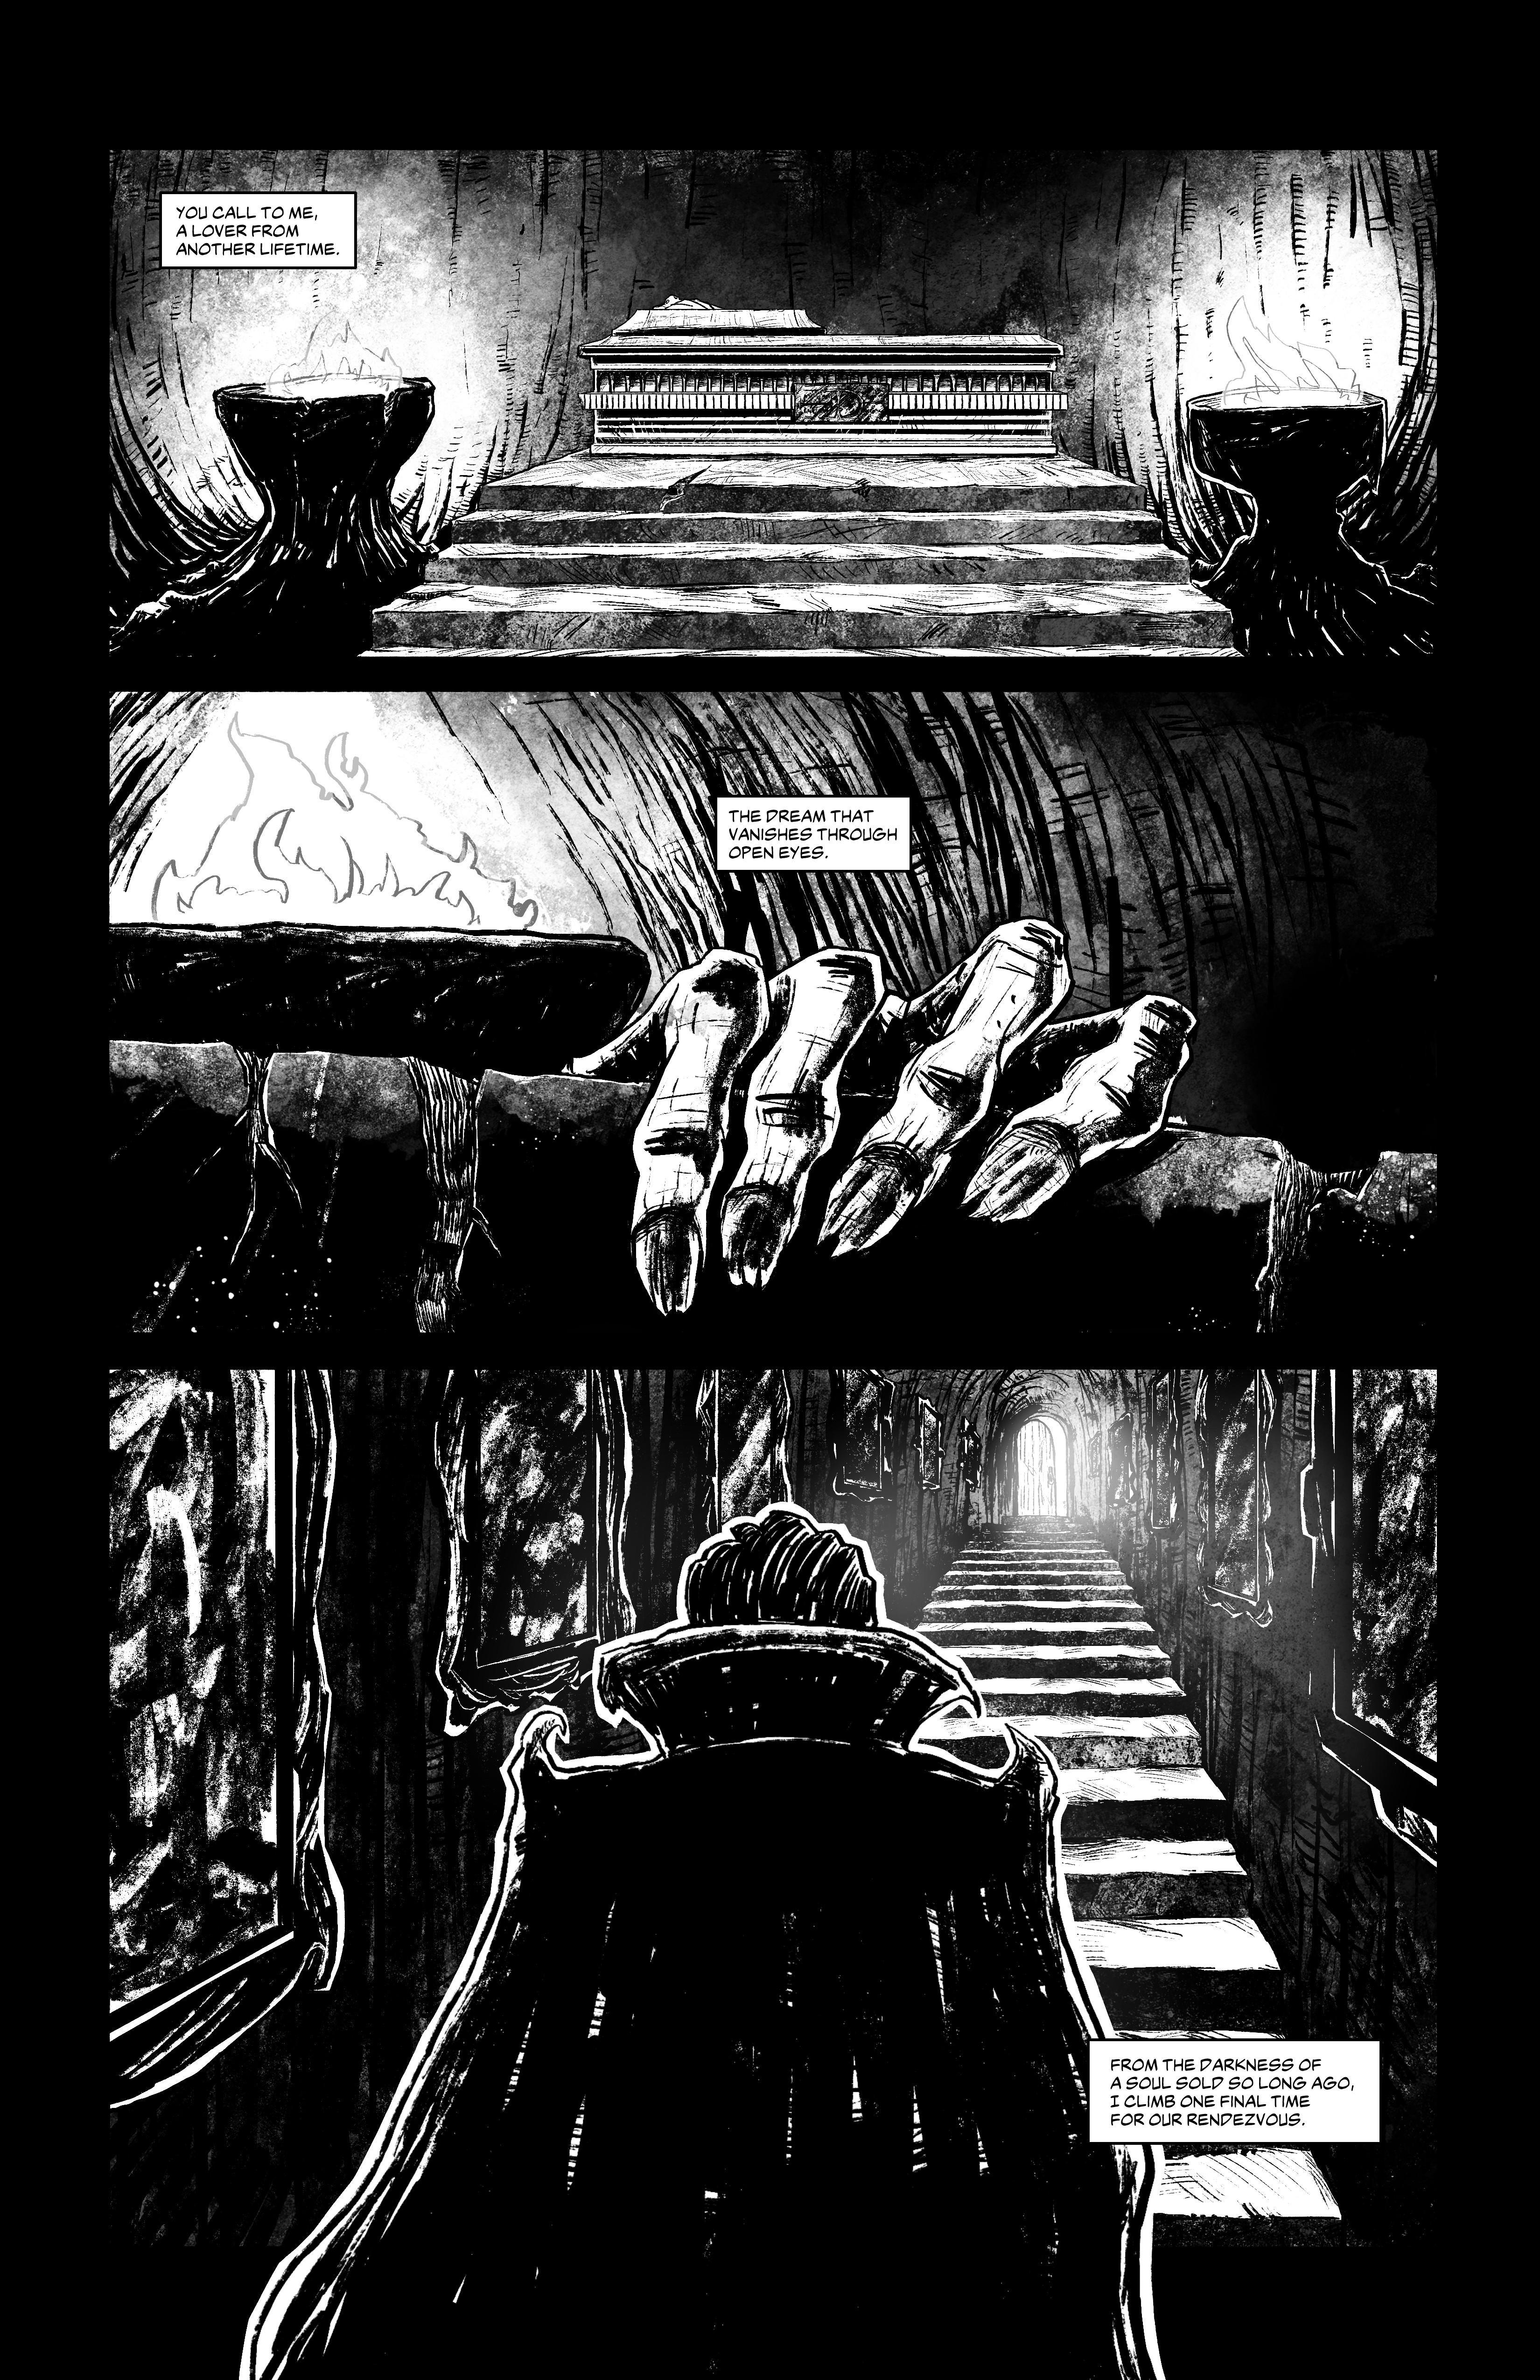 Page 1 - Art completed in Procreate. Lettering done in Clip Studio Paint.